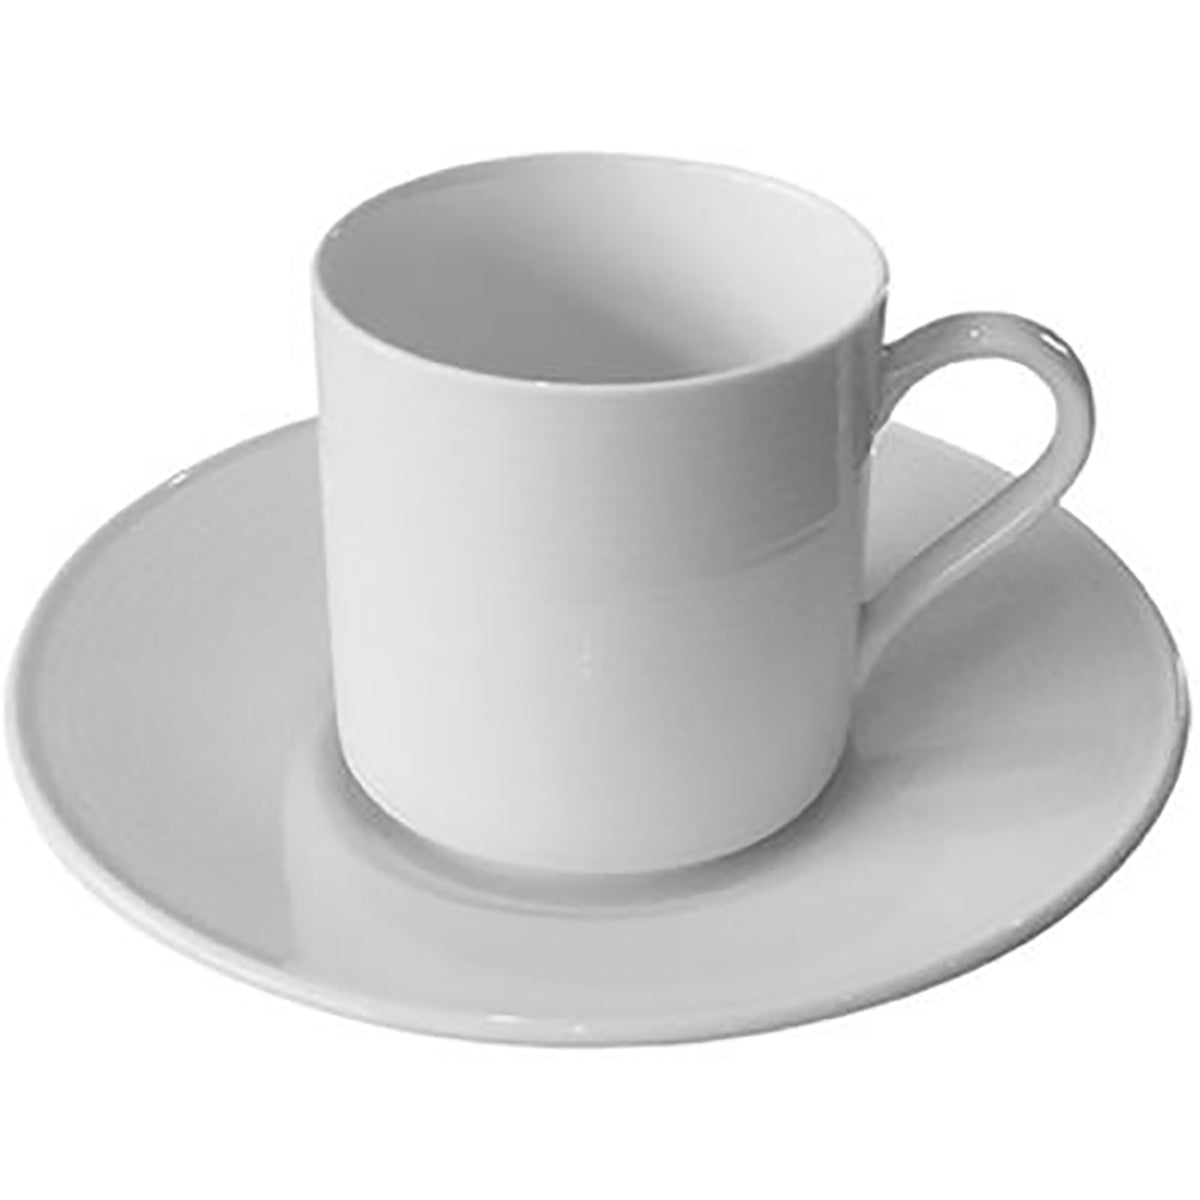 96087 Patra Porcelain Aura Saucer Well To Fit Double 96086 & 96089 (930/2066) Tomkin Australia Hospitality Supplies